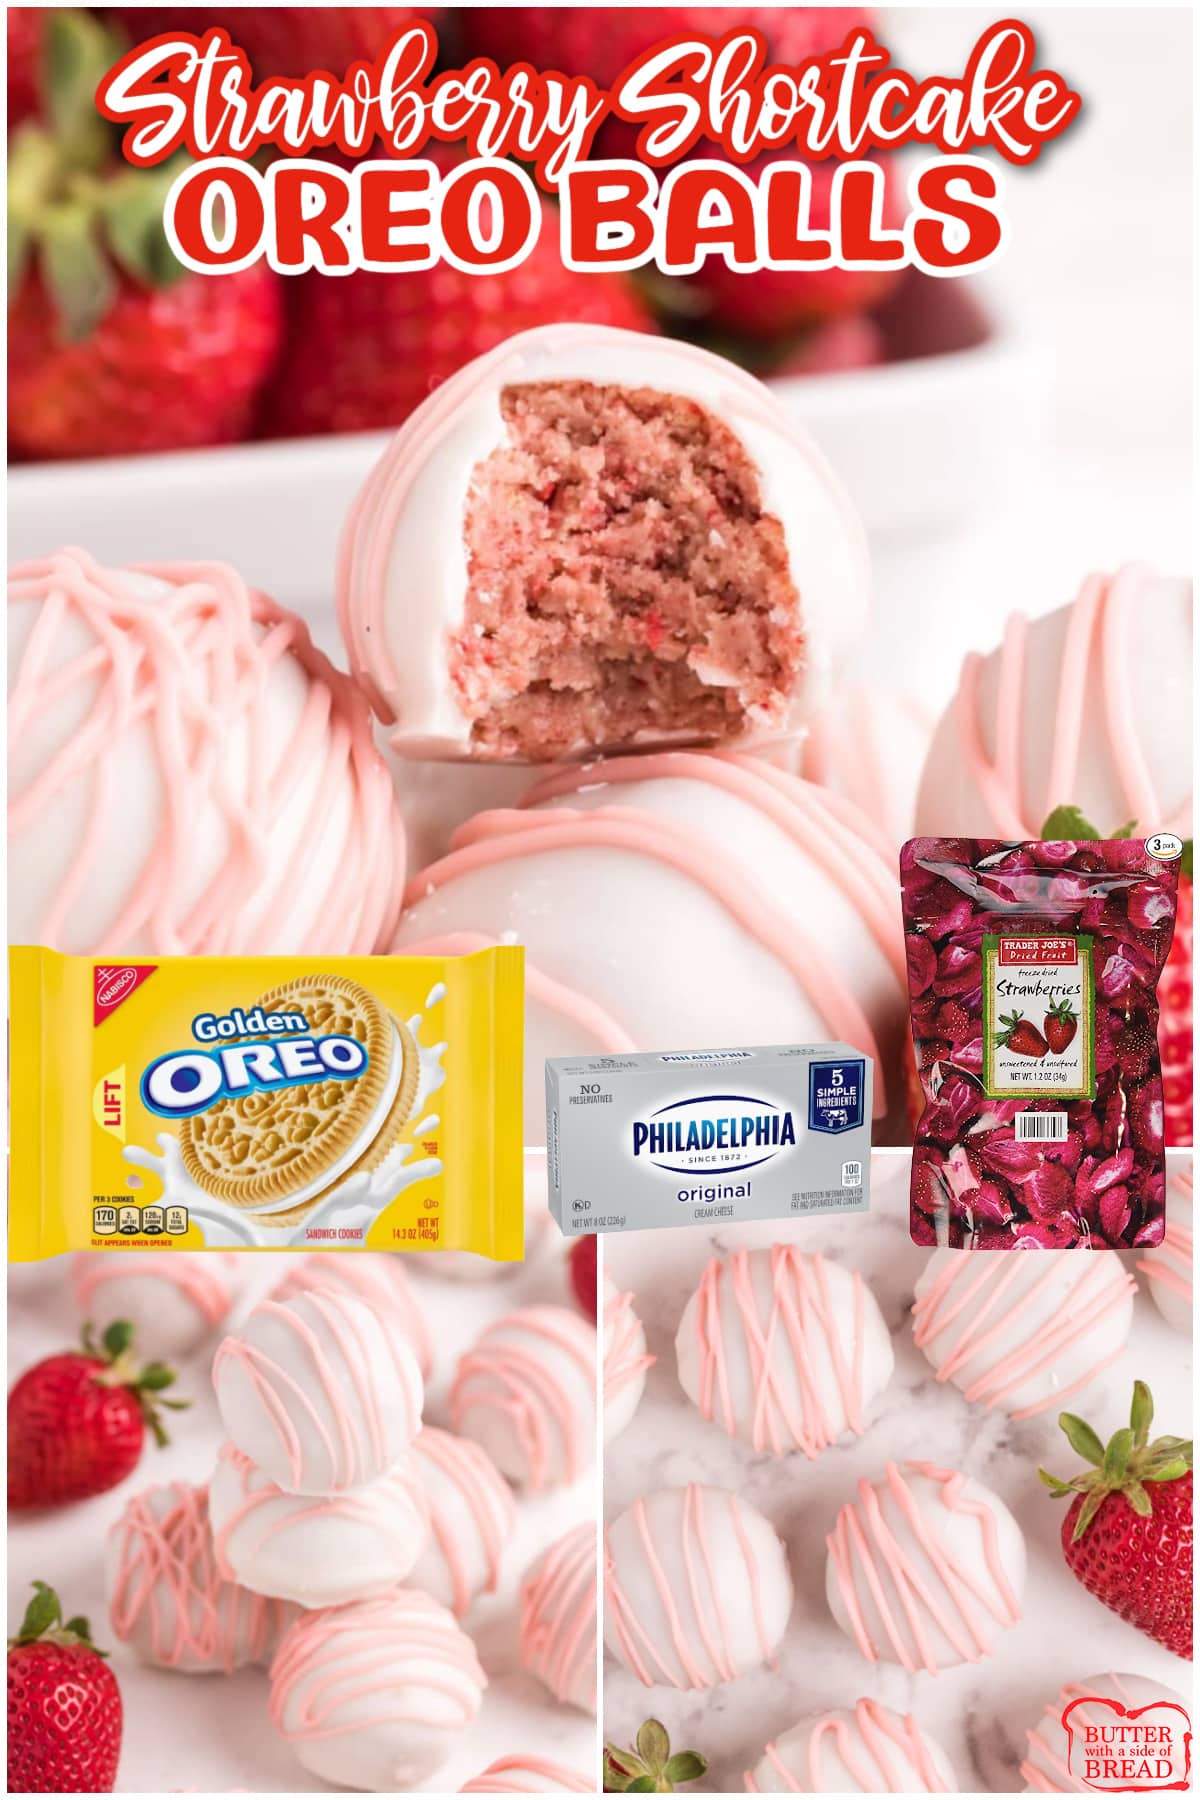 Strawberry Shortcake Oreo Balls are made in just a few minutes with dried strawberries and Golden Oreo cookies! These delicious no-bake treats are made with just 4 ingredients!